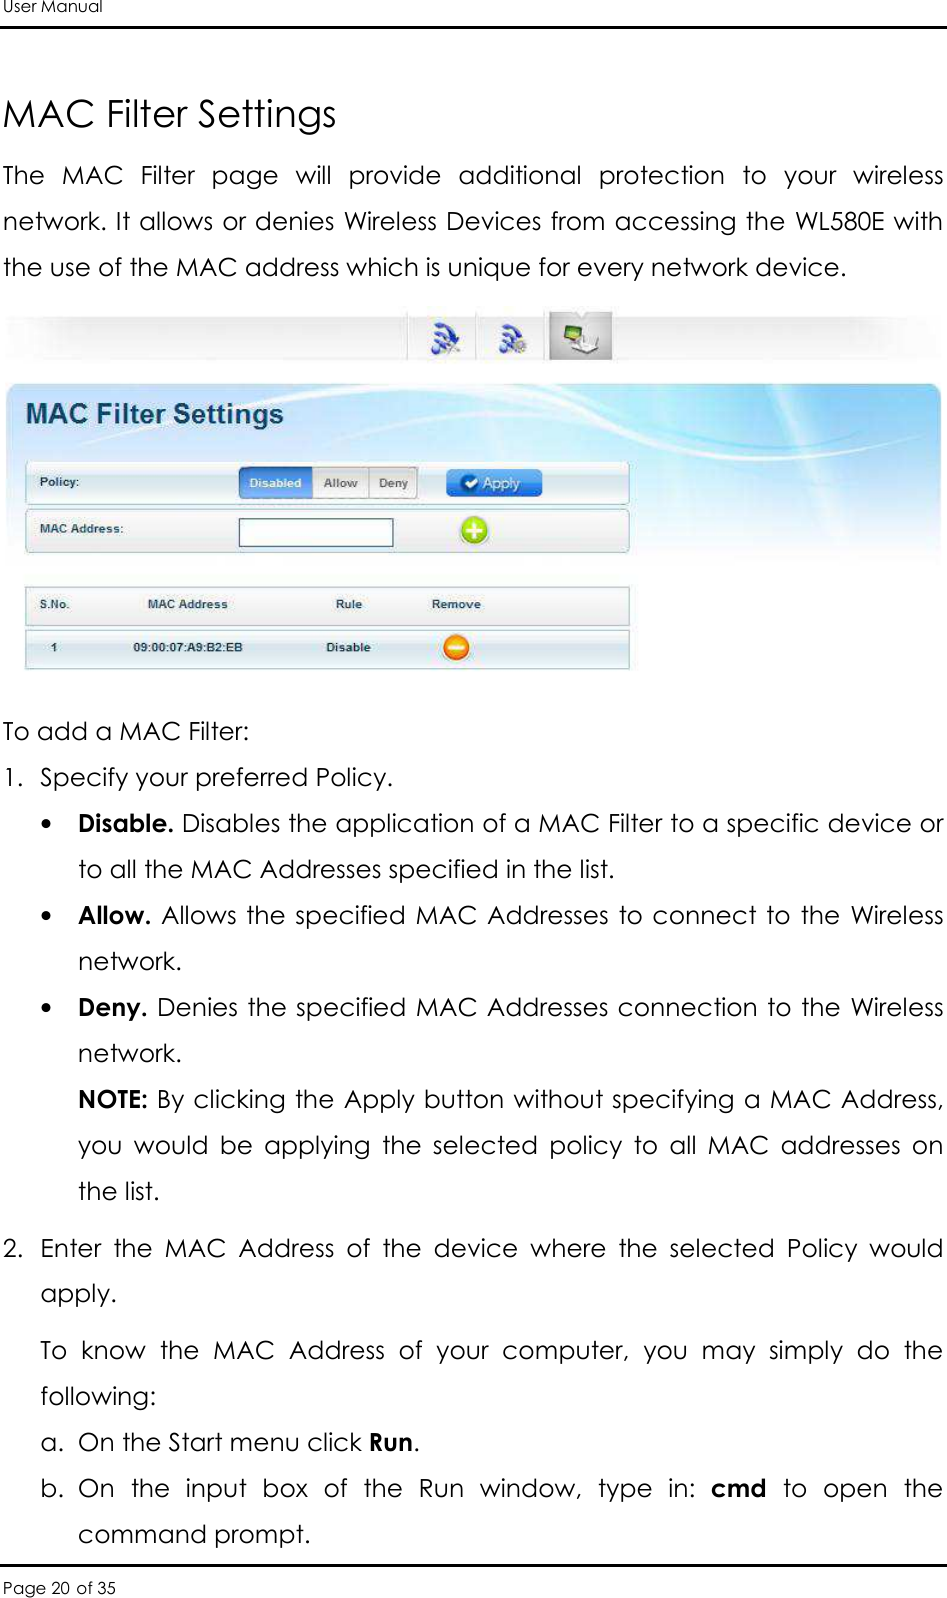 User Manual Page 20 of 35  MAC Filter Settings The  MAC  Filter  page  will  provide  additional  protection  to  your  wireless network. It allows or denies Wireless Devices from accessing the WL580E with the use of the MAC address which is unique for every network device.  To add a MAC Filter:  1. Specify your preferred Policy.  • Disable. Disables the application of a MAC Filter to a specific device or to all the MAC Addresses specified in the list.  • Allow. Allows the specified MAC Addresses to connect to the Wireless network.  • Deny. Denies the specified MAC Addresses connection to the Wireless network.  NOTE: By clicking the Apply button without specifying a MAC Address, you  would  be  applying  the  selected  policy  to  all  MAC  addresses  on the list. 2. Enter  the  MAC  Address  of  the  device  where  the  selected  Policy  would apply.  To  know  the  MAC  Address  of  your  computer,  you  may  simply  do  the following:  a. On the Start menu click Run.  b. On  the  input  box  of  the  Run  window,  type  in:  cmd  to  open  the command prompt.  